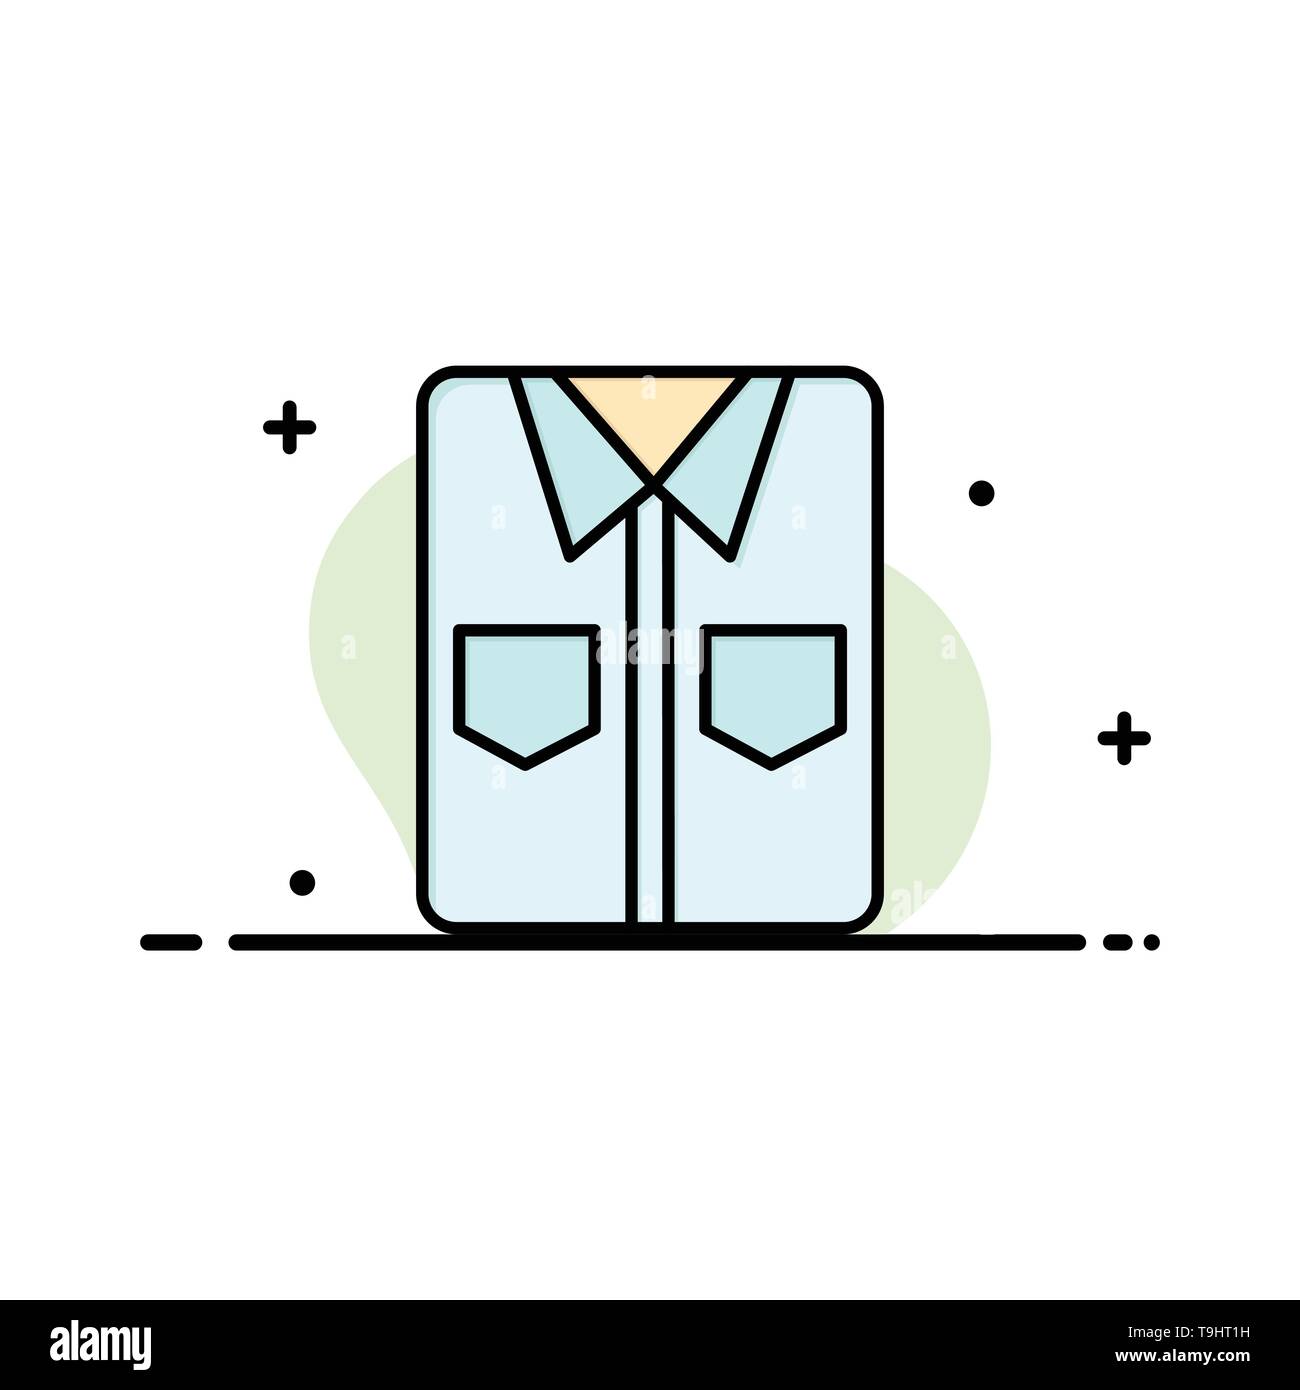 https://c8.alamy.com/comp/T9HT1H/clothes-shirt-tshirt-shopping-business-flat-line-filled-icon-vector-banner-template-T9HT1H.jpg